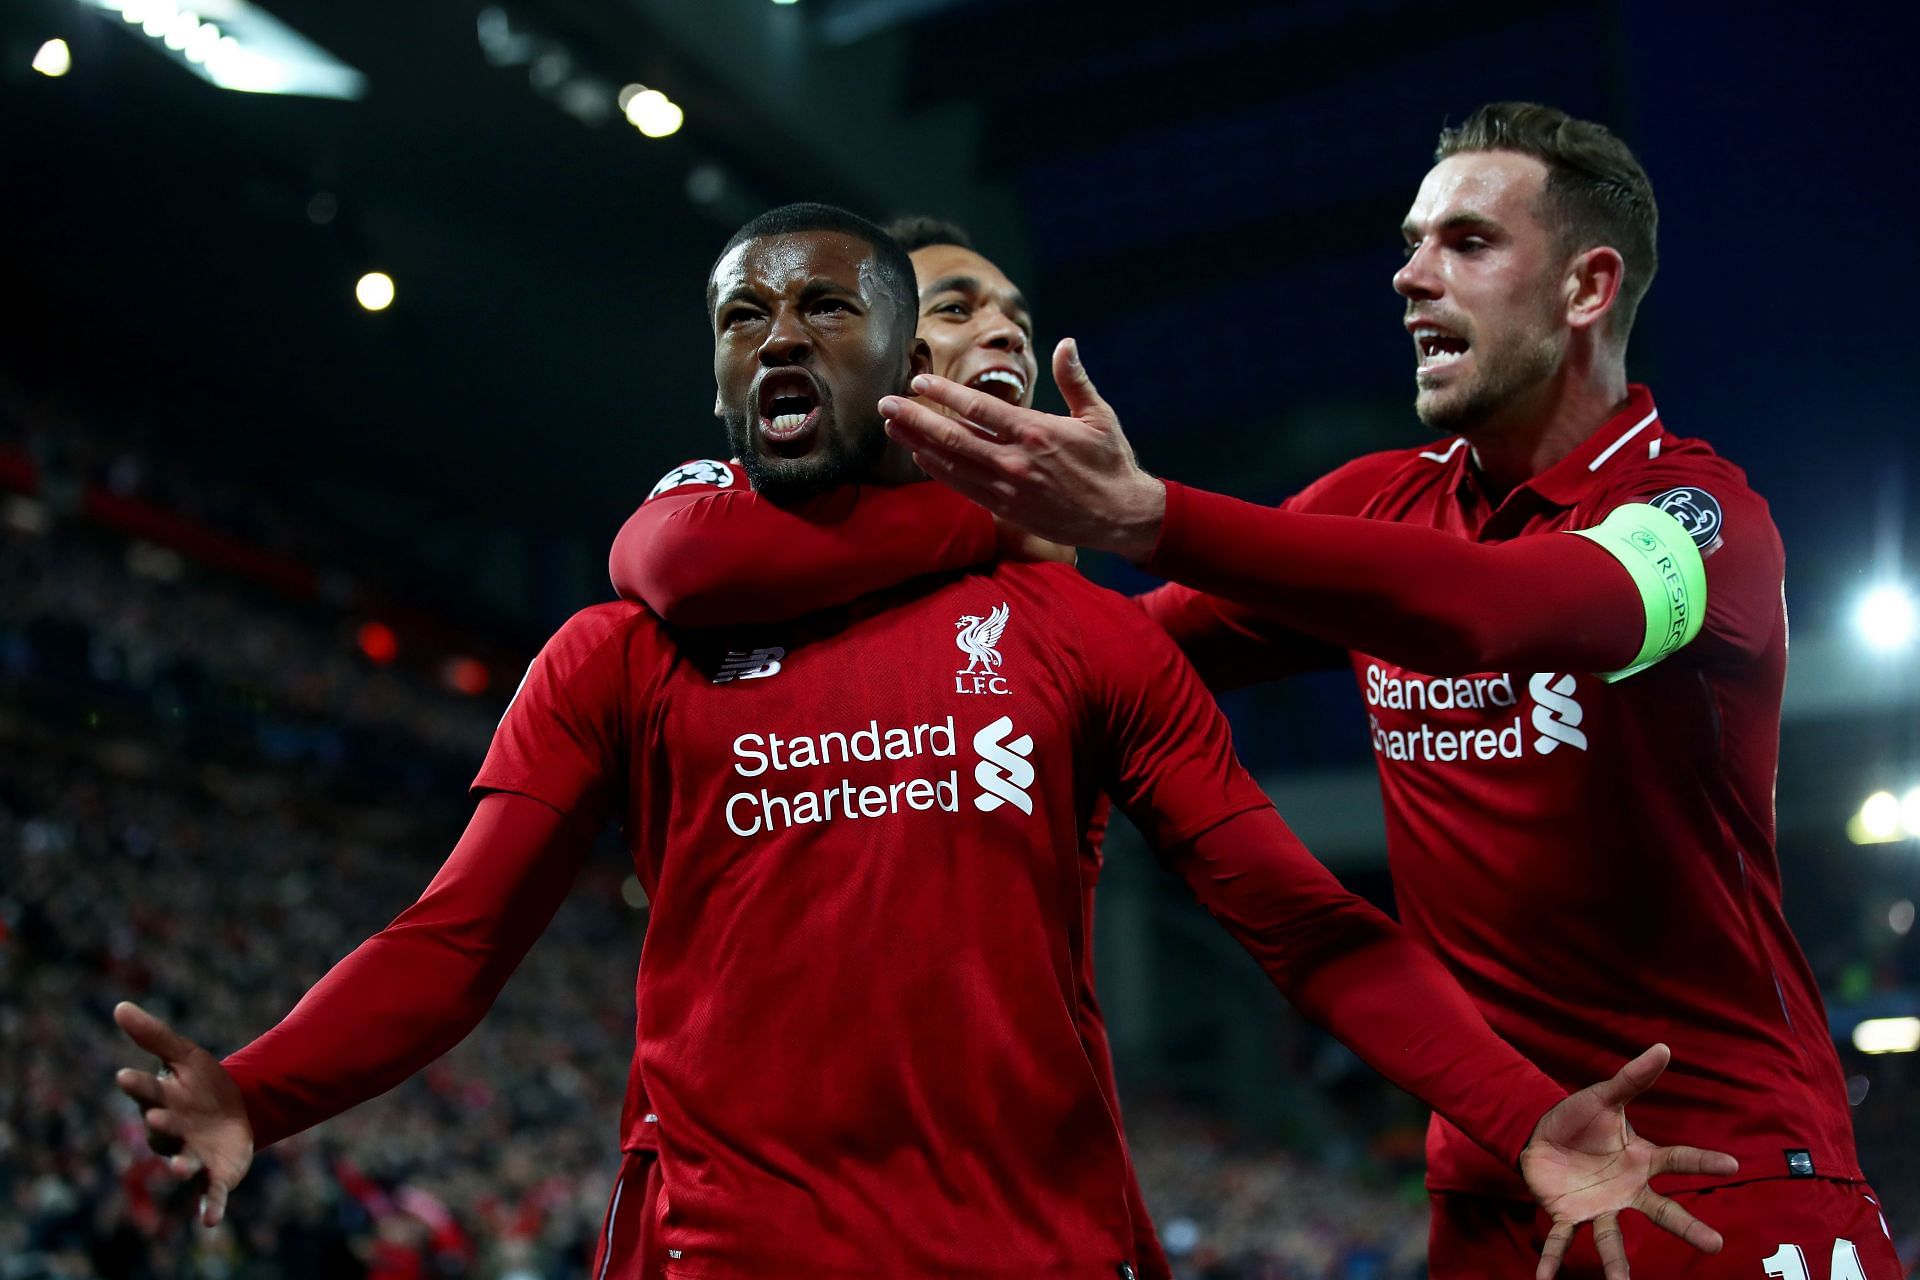 Gini Wijnaldum celebrates after equalling the score in the tie